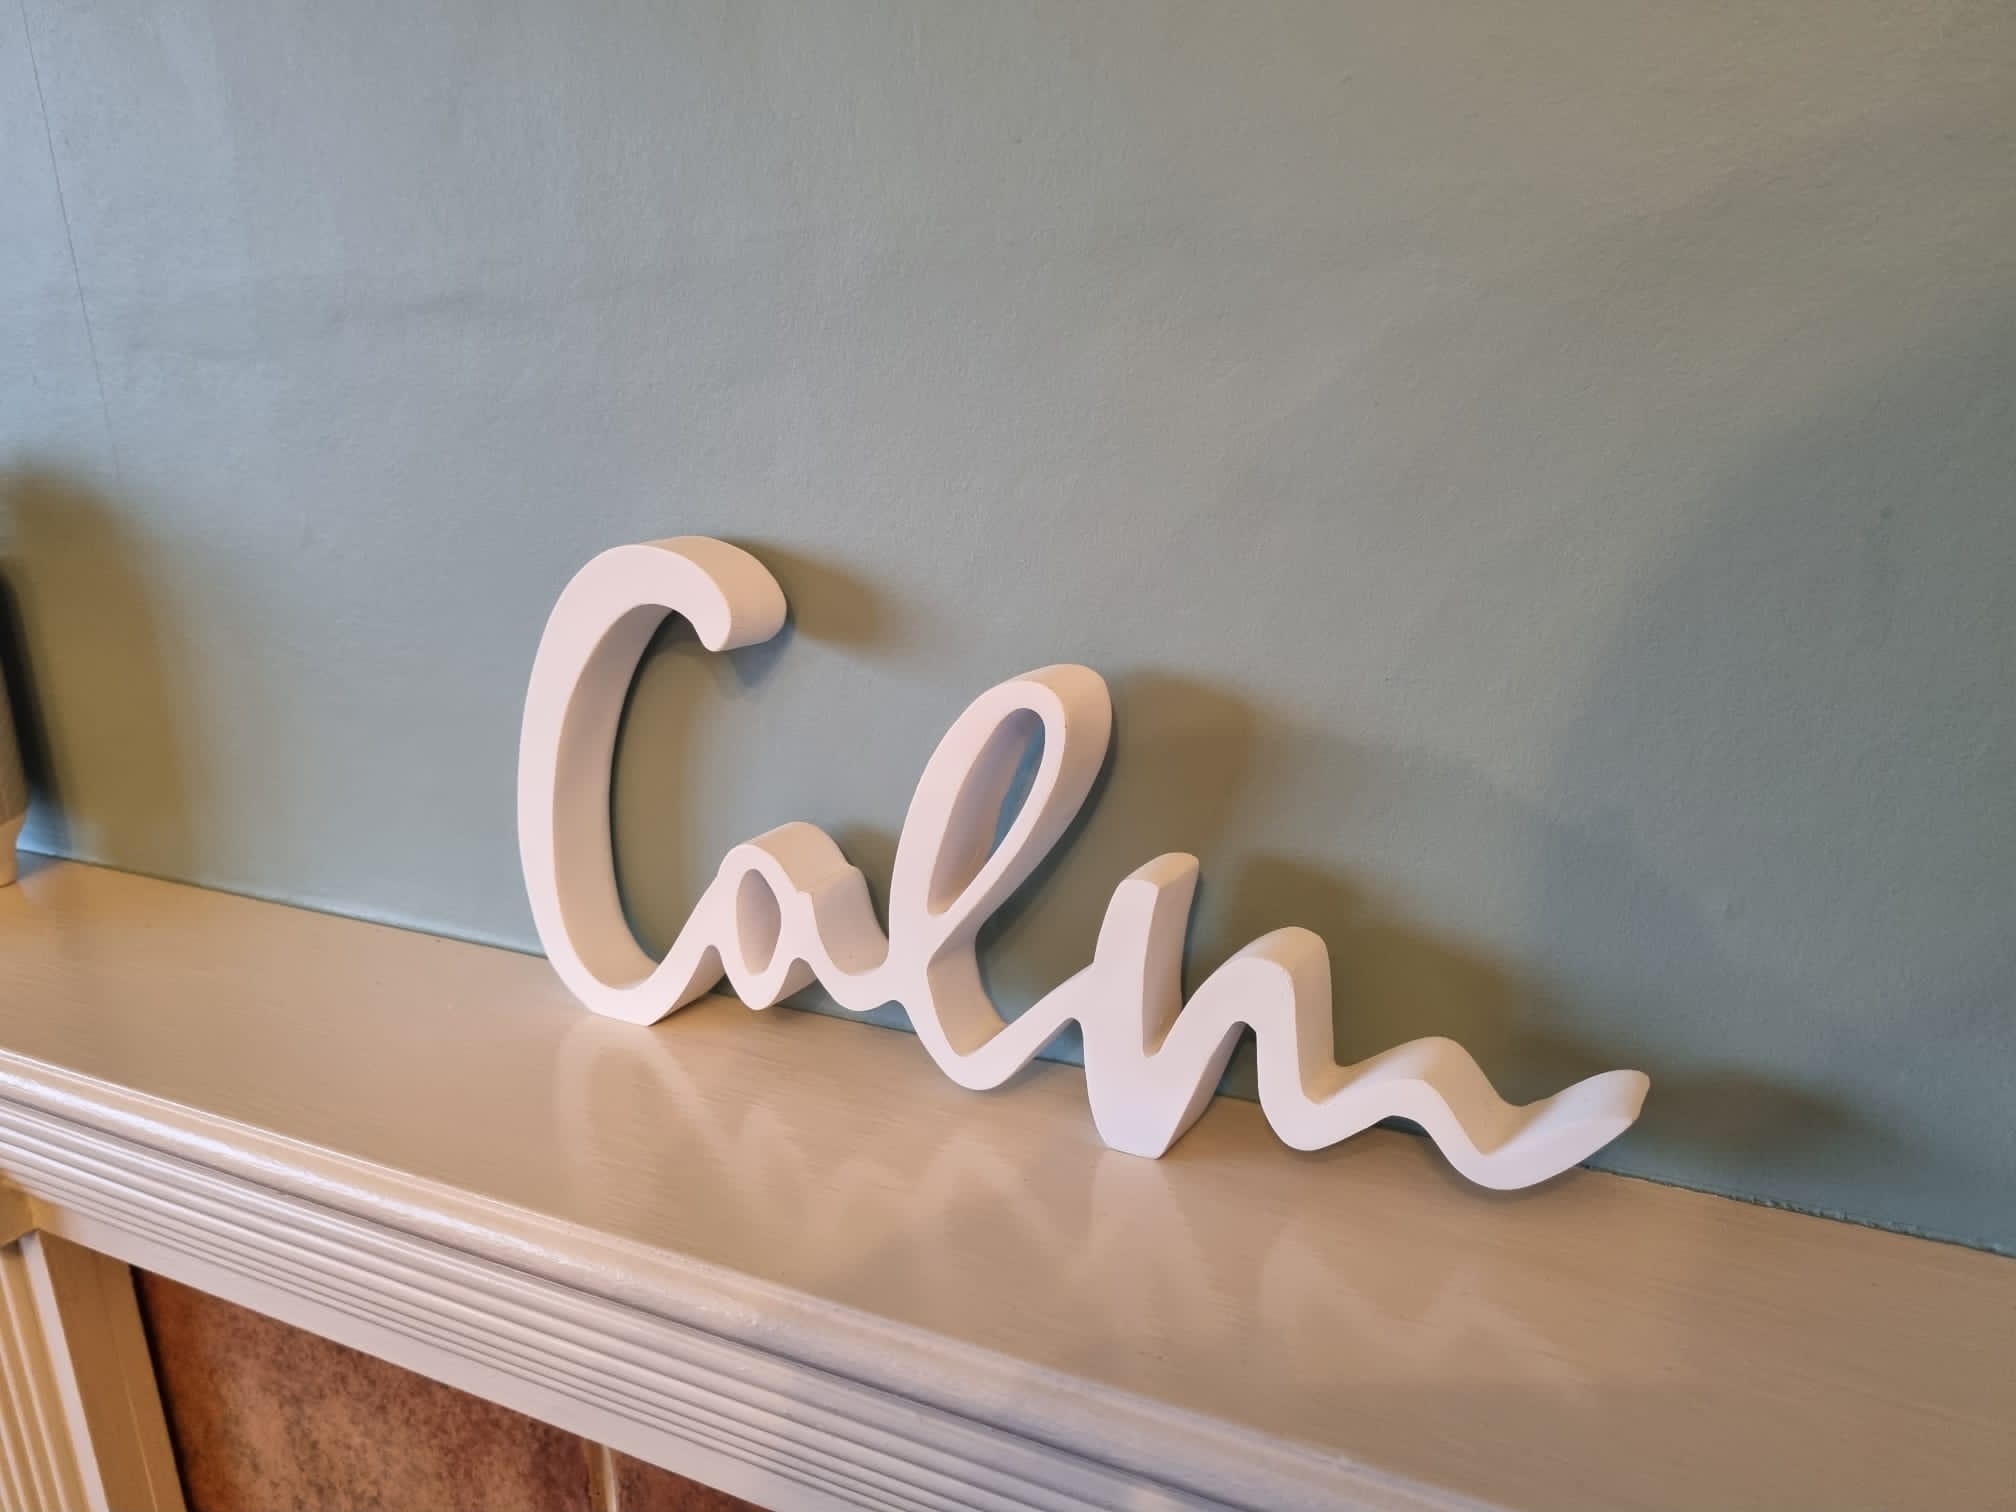 sculpture of the word calm in Millers cottage